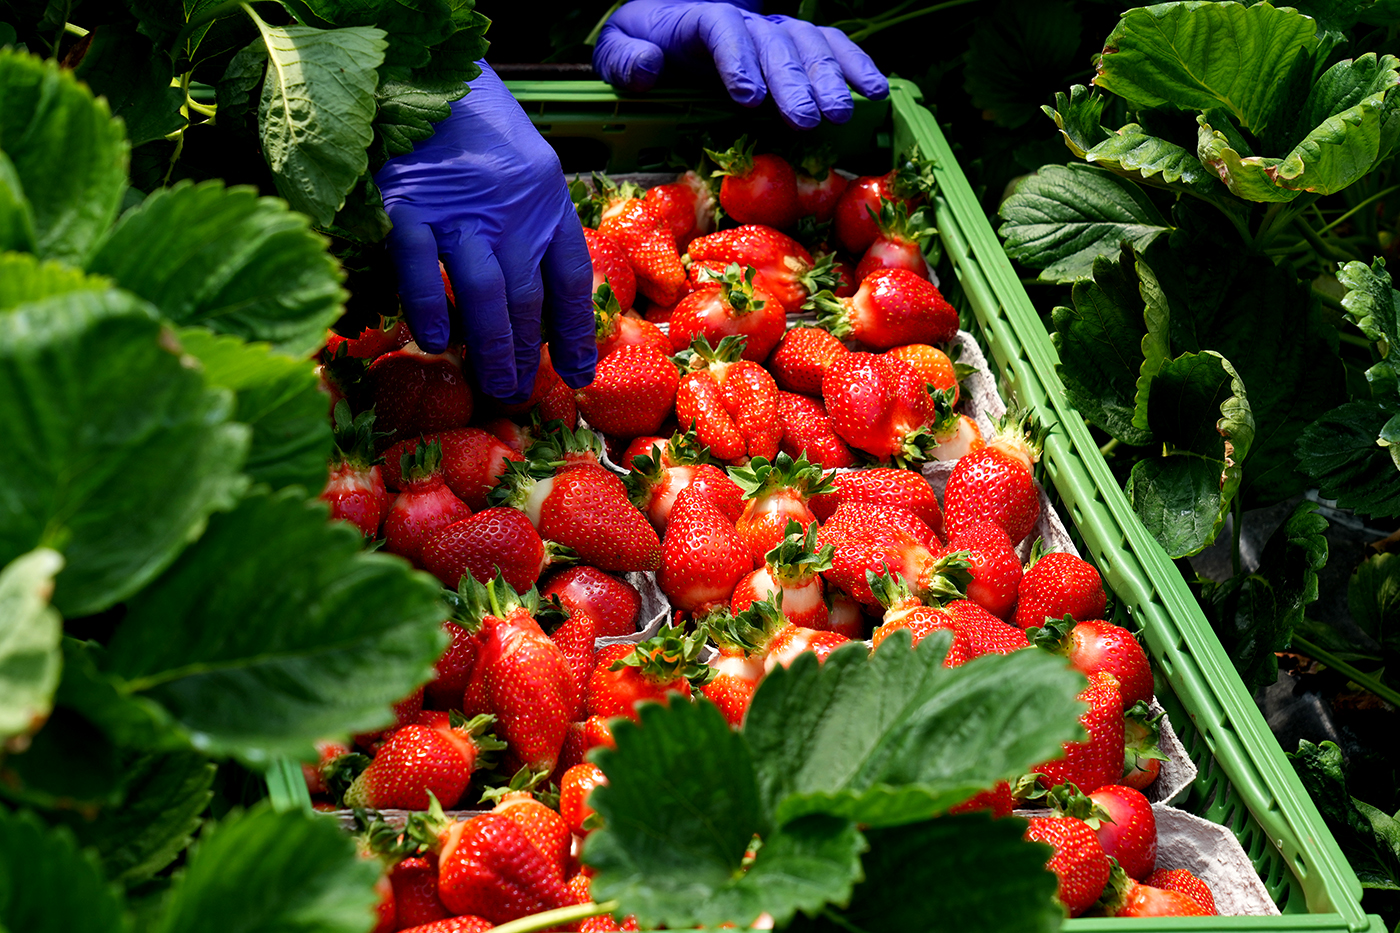 gloved hand reaching into box of strawberries